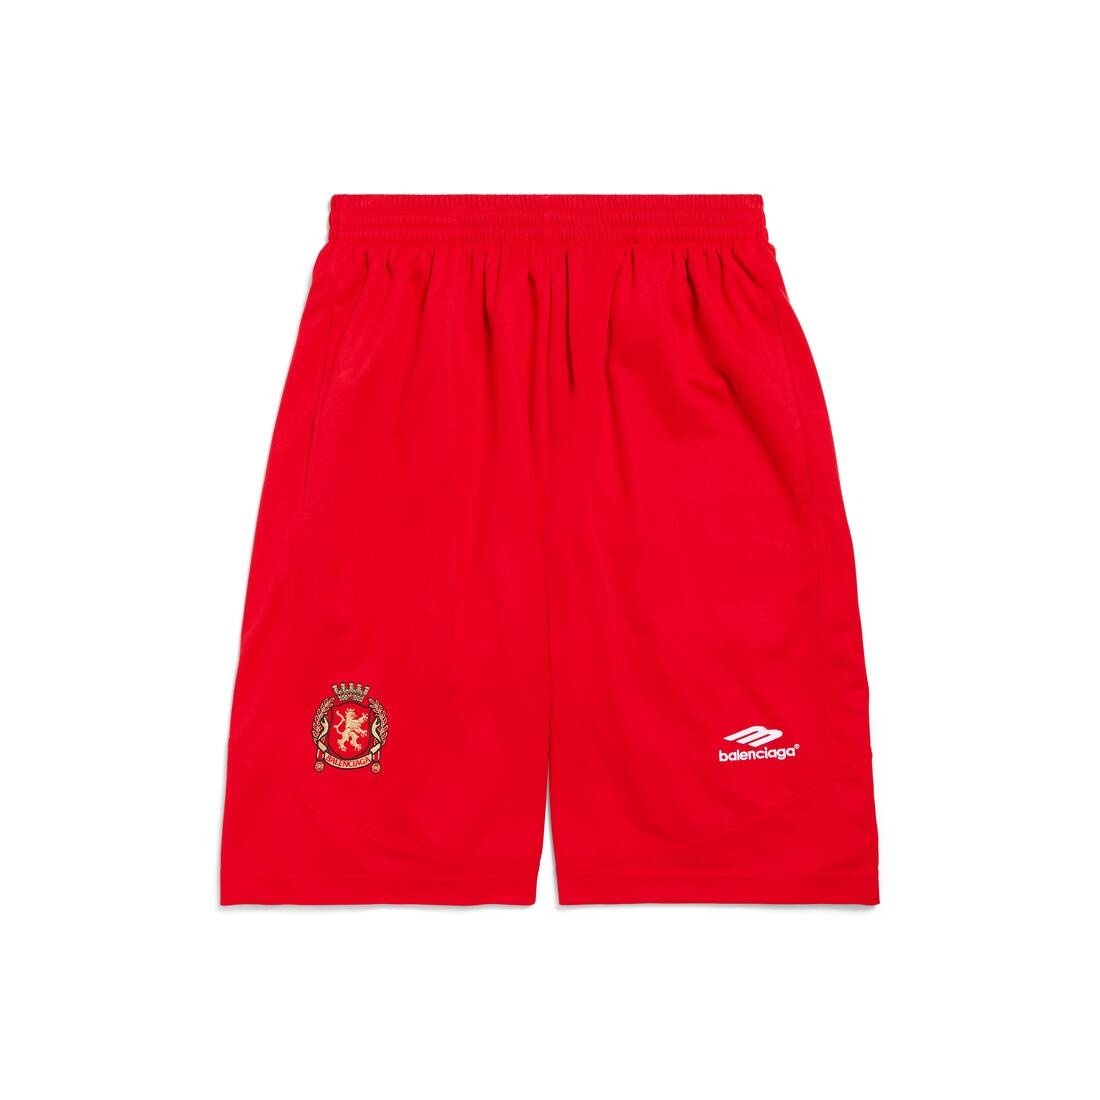 Soccer Baggy Shorts in Red/white - 1